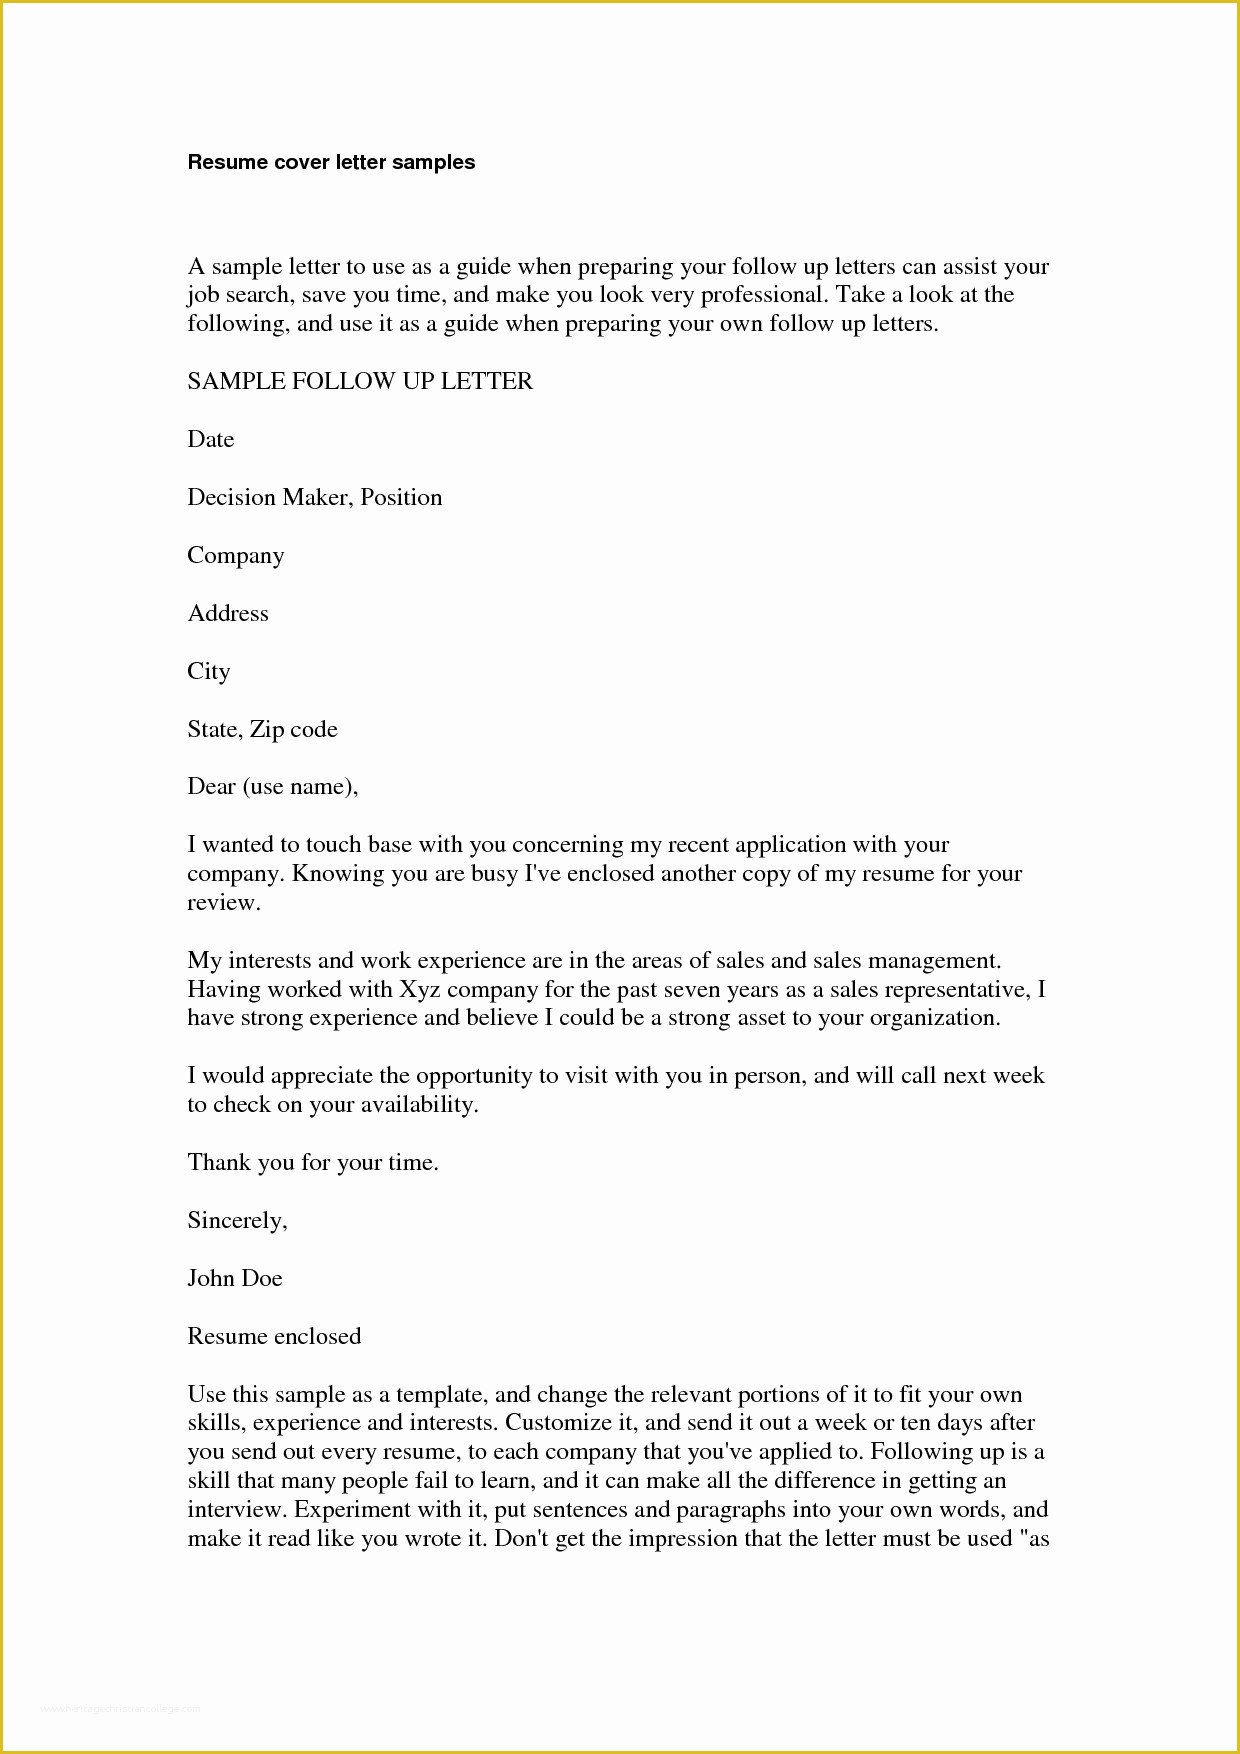 Free Online Resume Cover Letter Template Of Best S Of Professional Resume Cover Letter Template